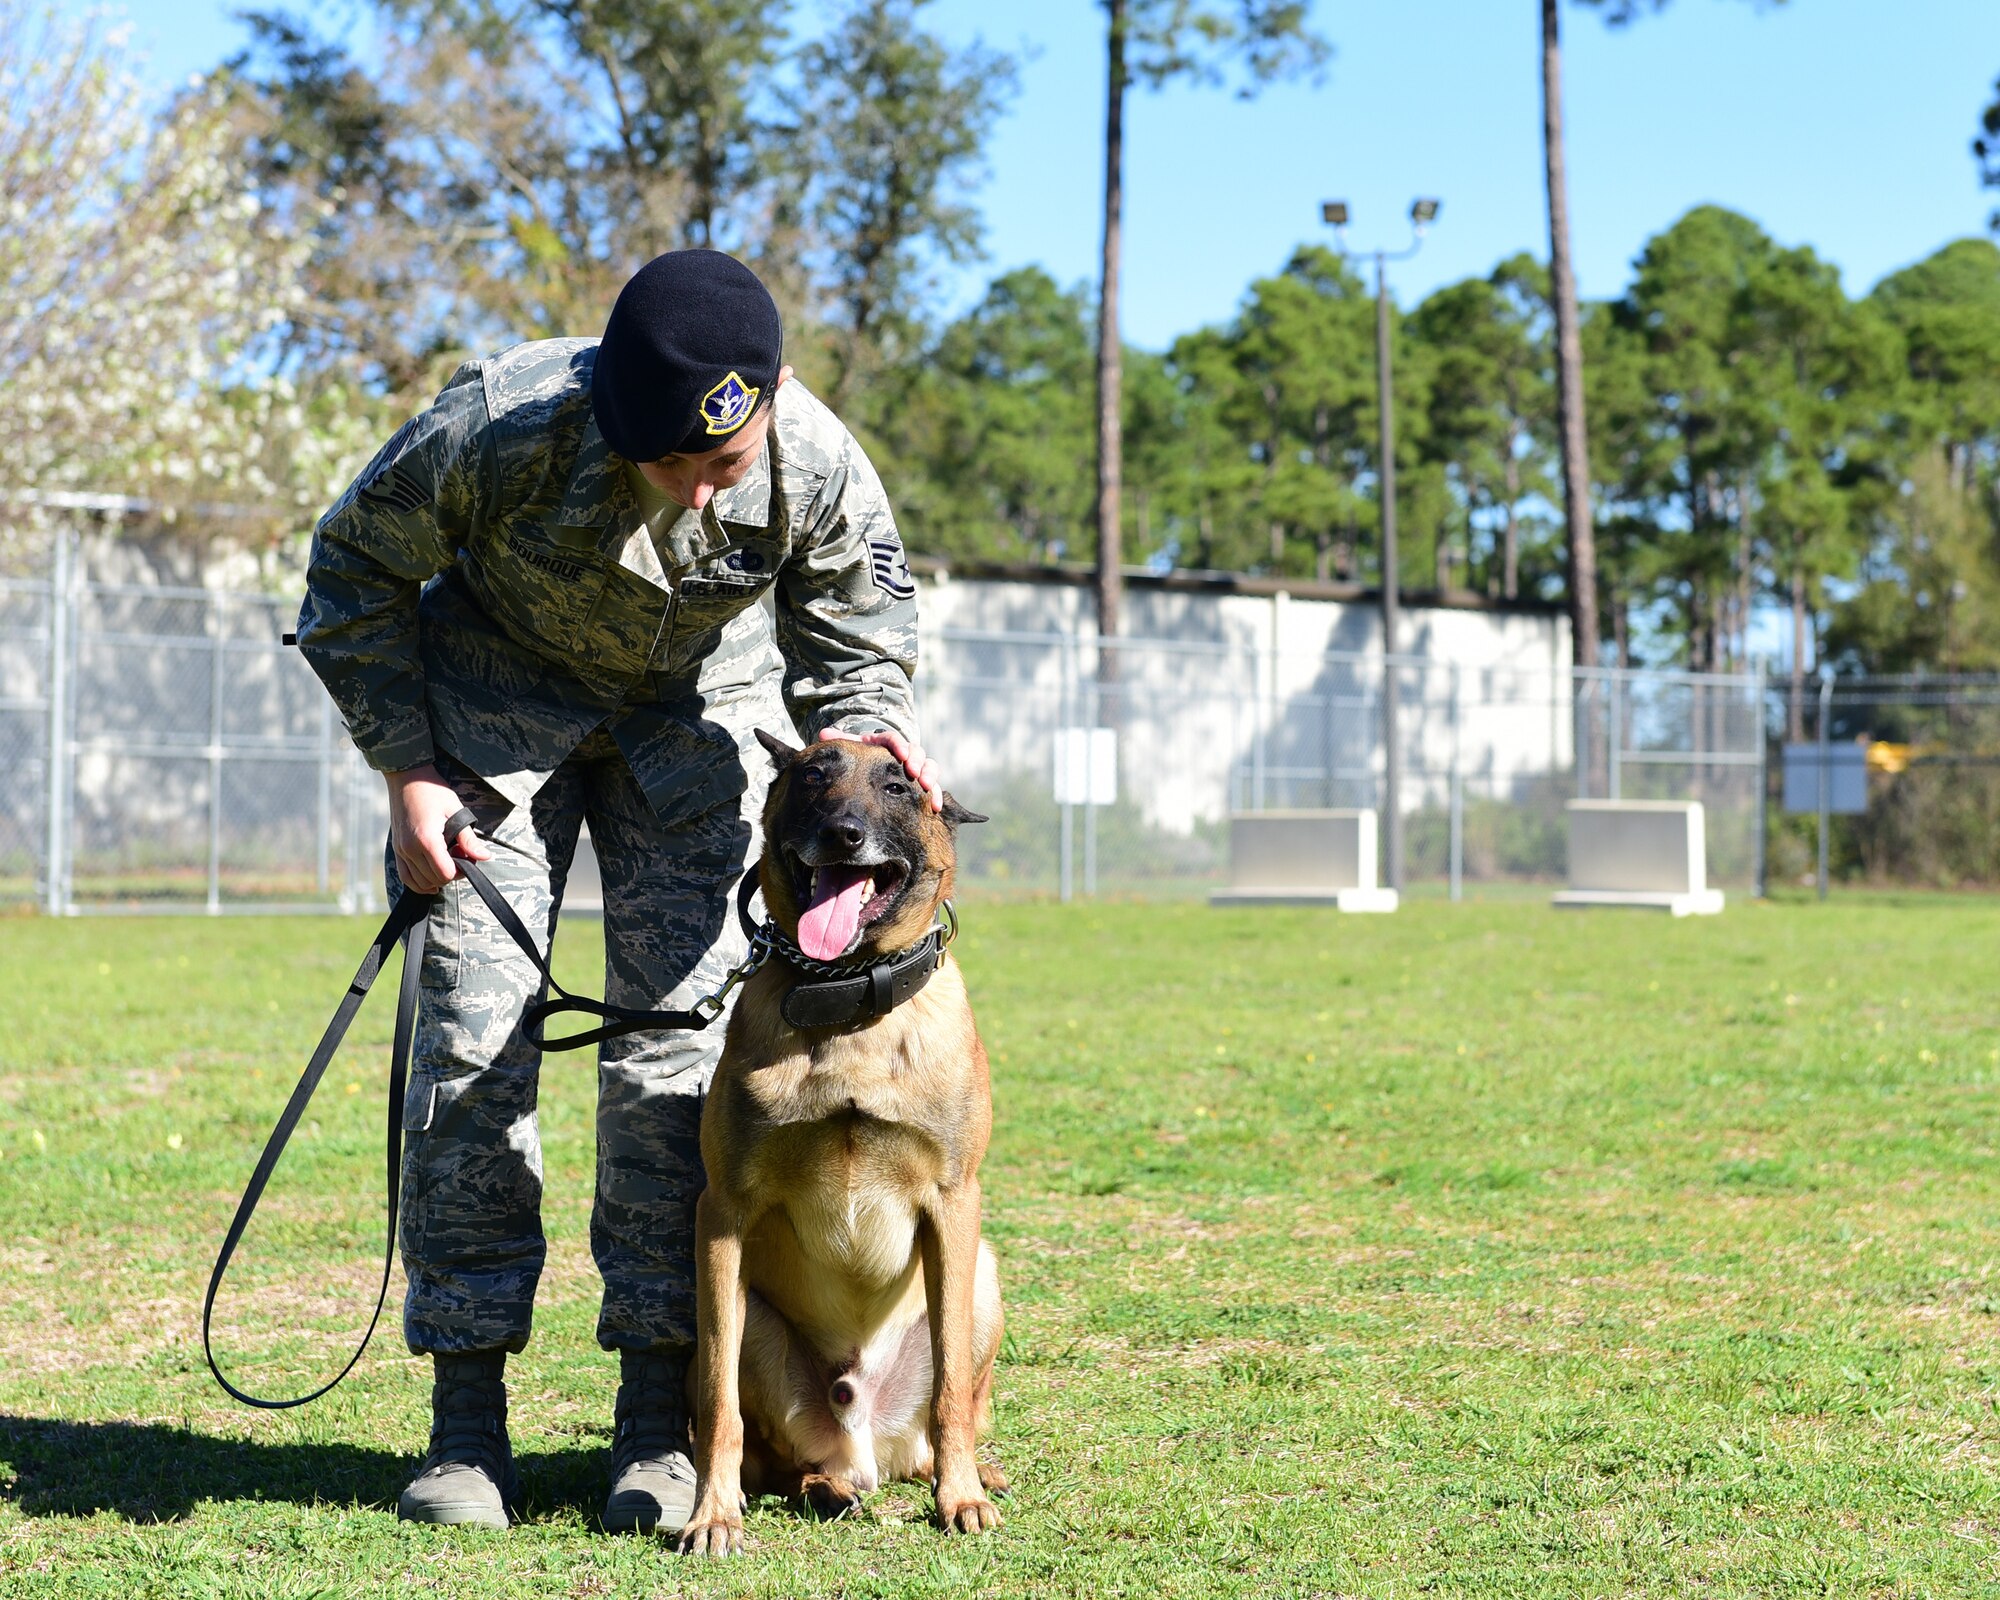 U.S. Air Force Staff Sgt. Caitlin Bourque, 325th Security Forces Squadron military working dog handler, pets her partner, Atila, during an interview at Tyndall Air Force Base, Fla. March 2, 2018. A military working dog handler is responsible for the care and training of his or her service dog, which contributes to combat operations abroad and installation security at home by providing target odor detection for both explosives and drugs. (U.S. Air Force photo by Senior Airman Cody R. Miller/Released)